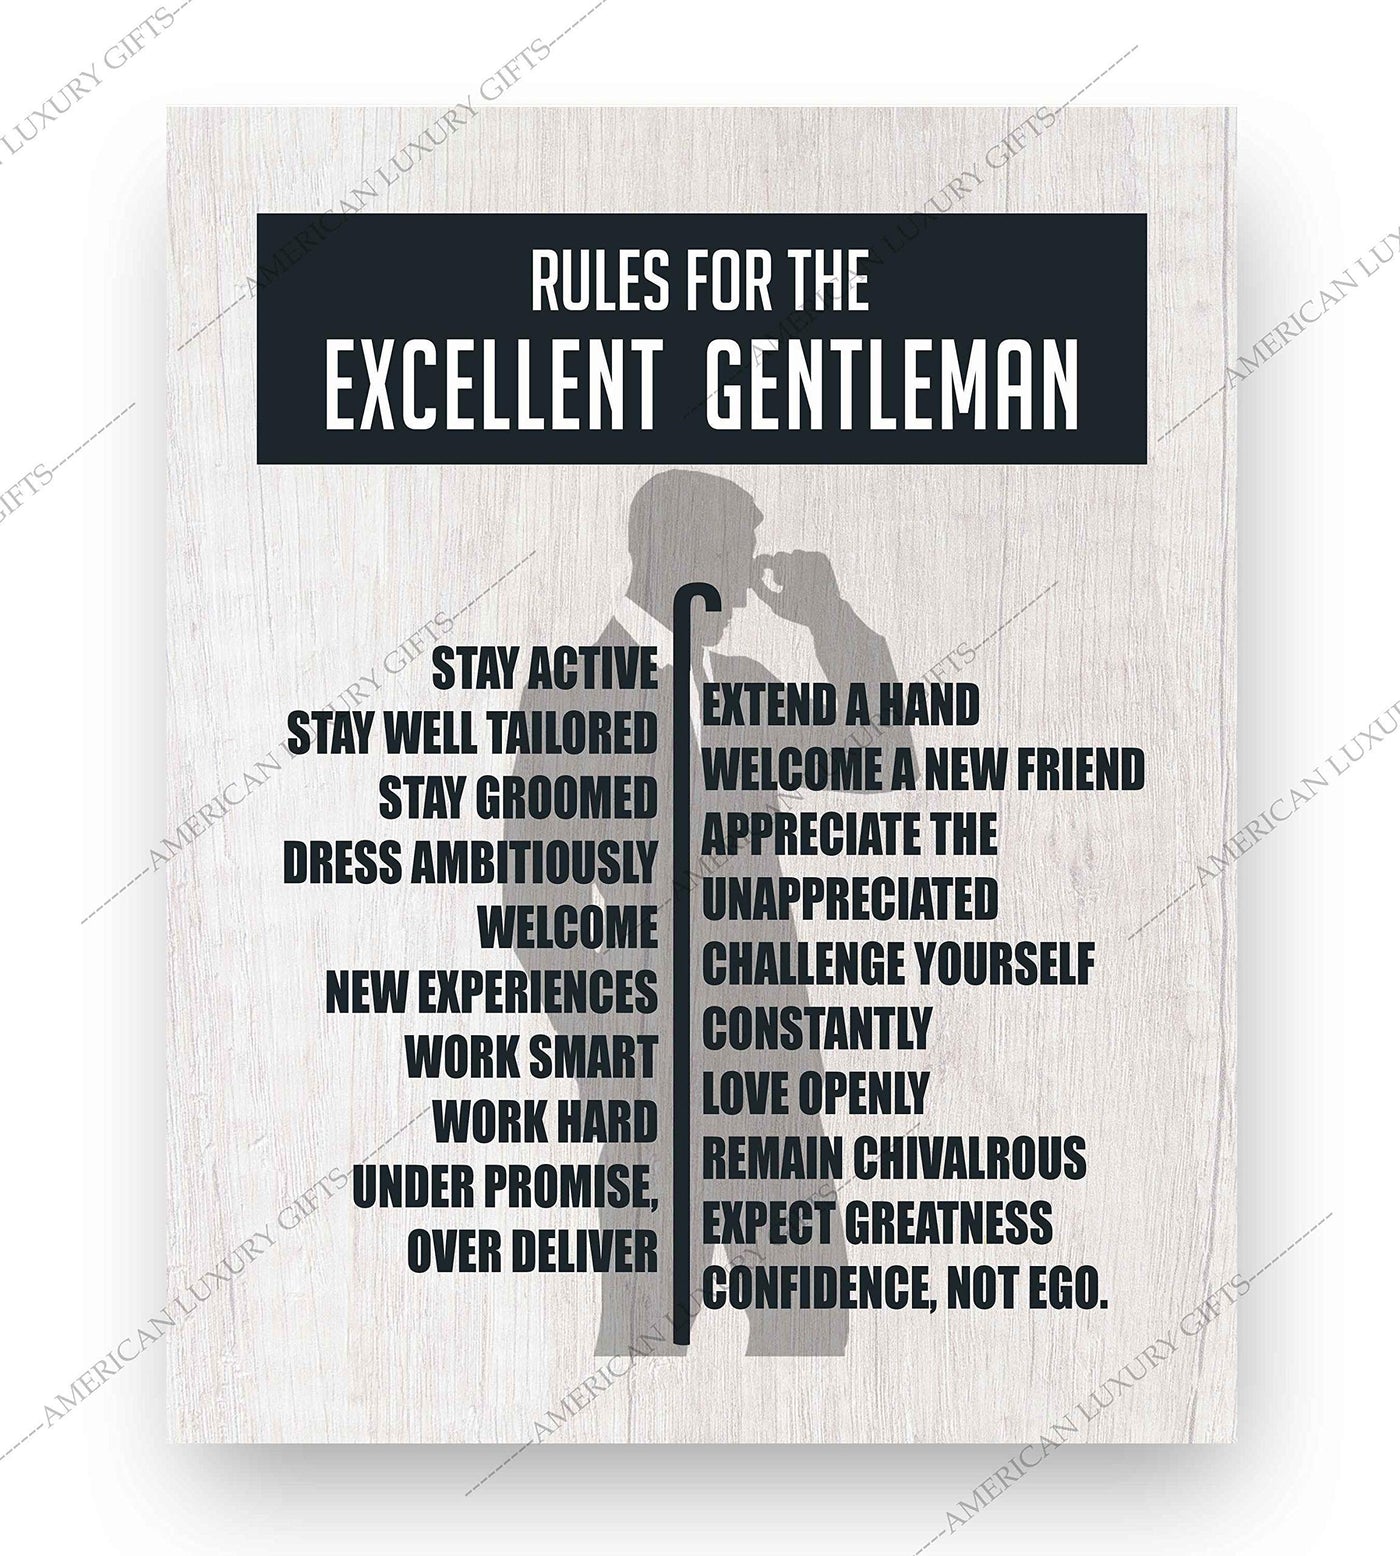 Rules for the Excellent Gentleman Inspirational Gentlemen Quotes Wall Art -8 x 10" Modern Poster Print w/Man Silhouette-Ready to Frame. Home-Office-Man Cave-Shop Decor. Great Tips for All Men!